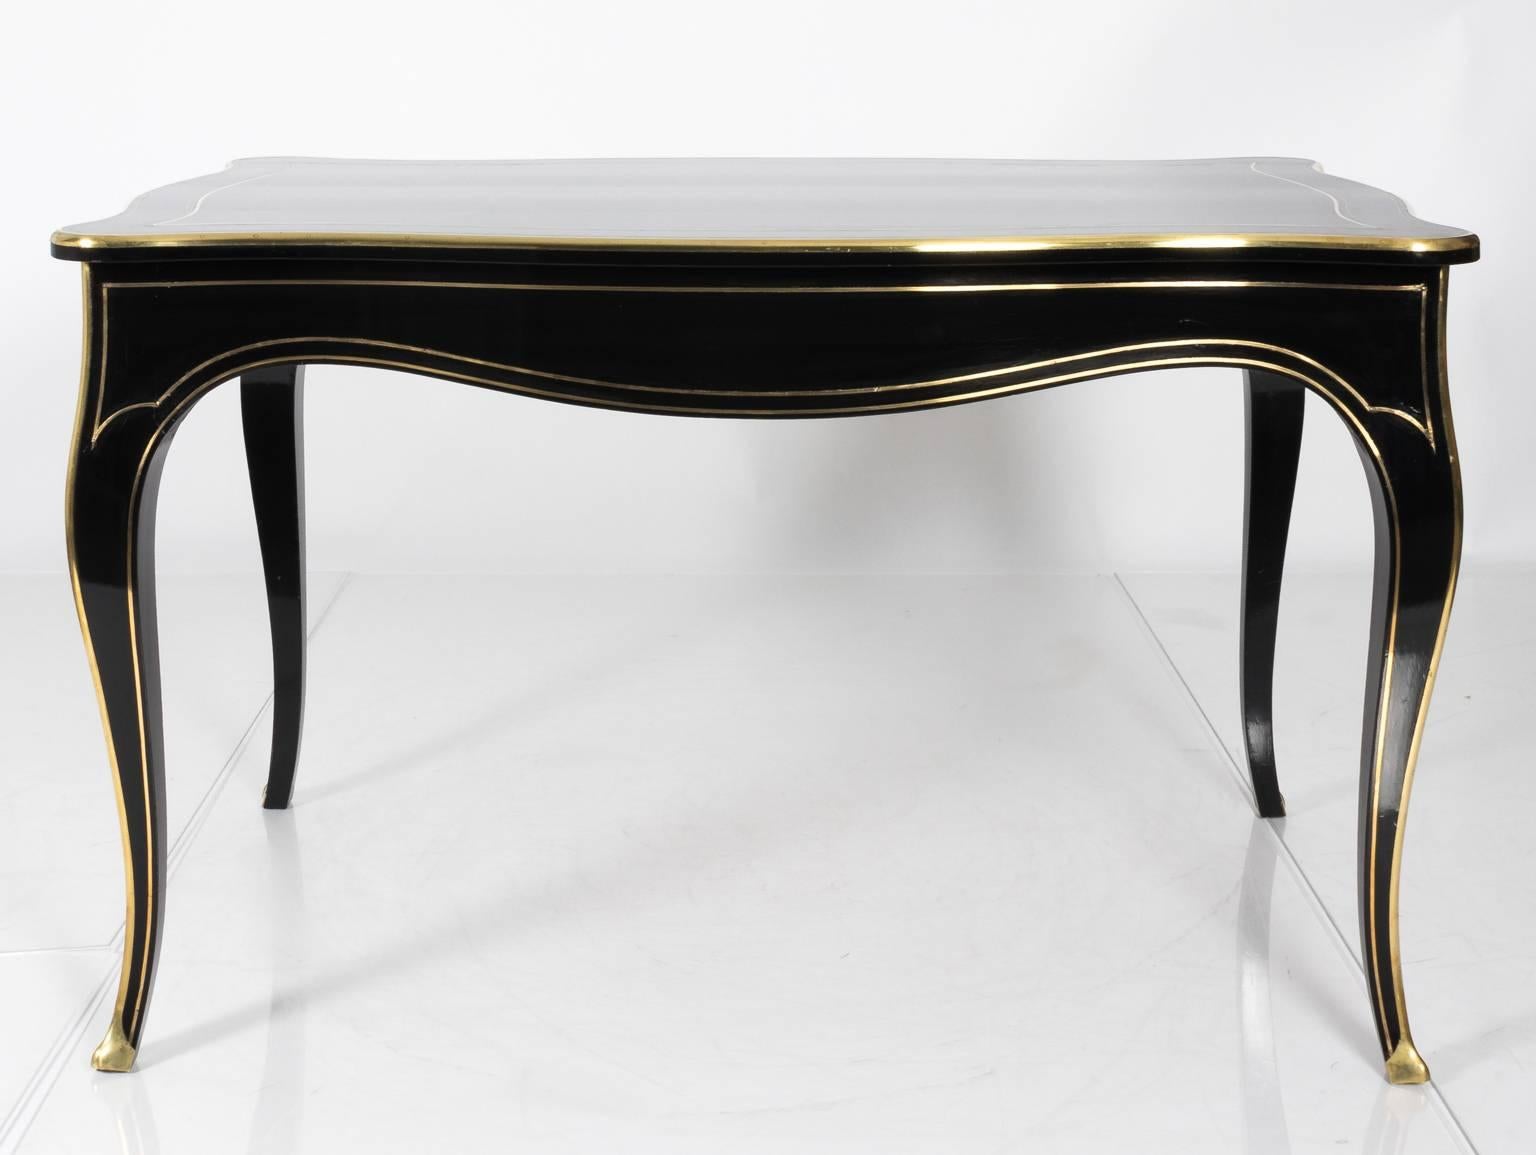 19th century French black lacquered writing desk.
 